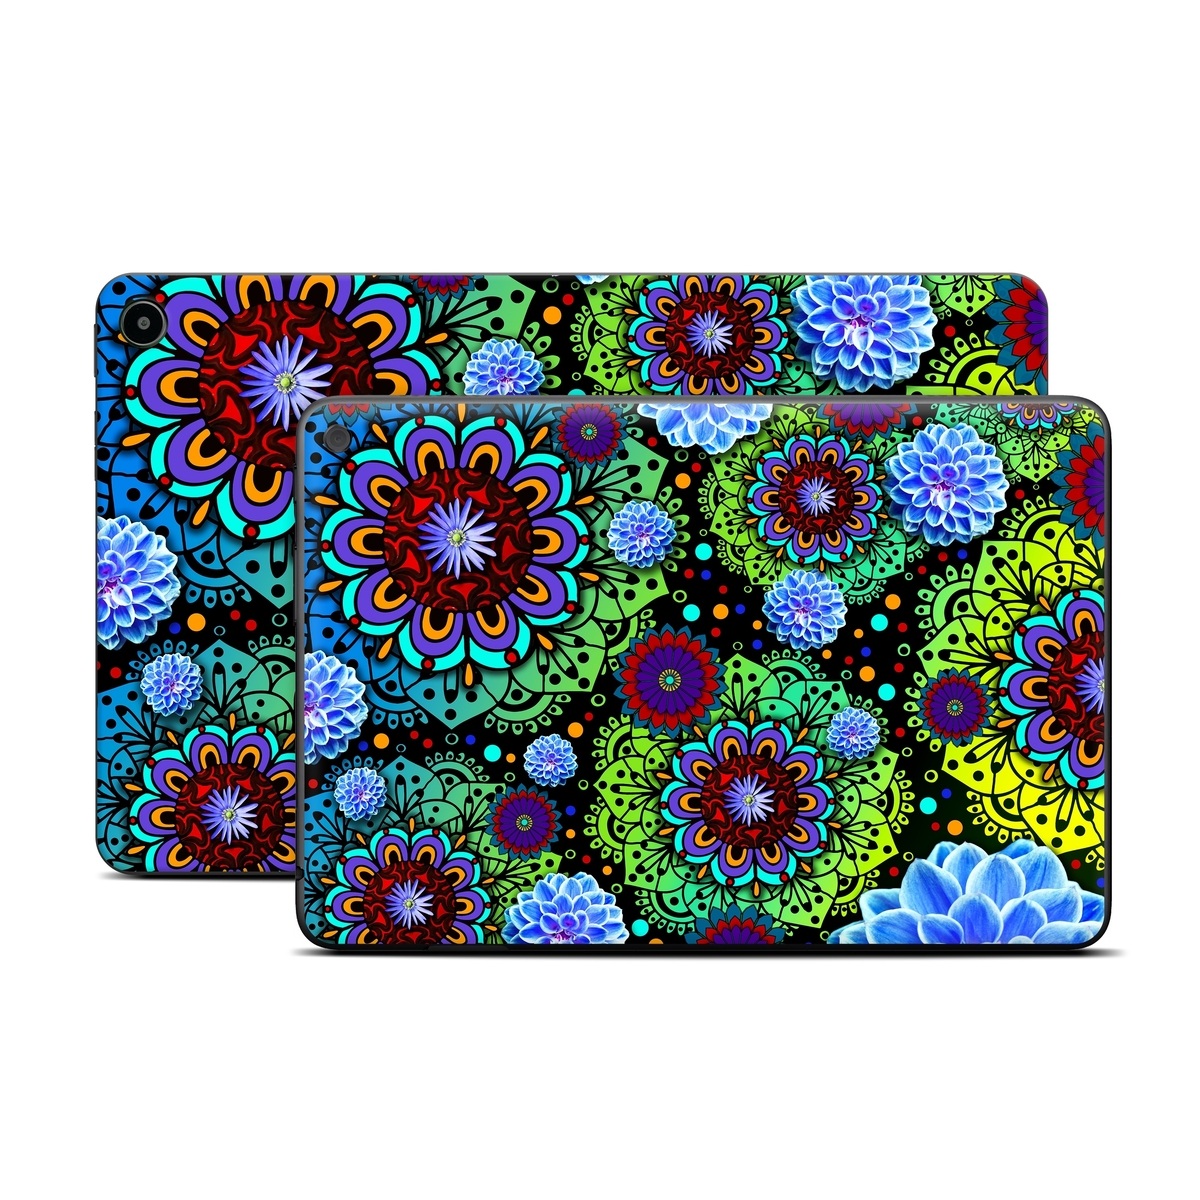 Amazon Fire Tablet Series Skin Skin design of Pattern, Psychedelic art, Design, Flower, Art, Visual arts, Floral design, Plant, Textile, Symmetry, with black, blue, green, purple colors